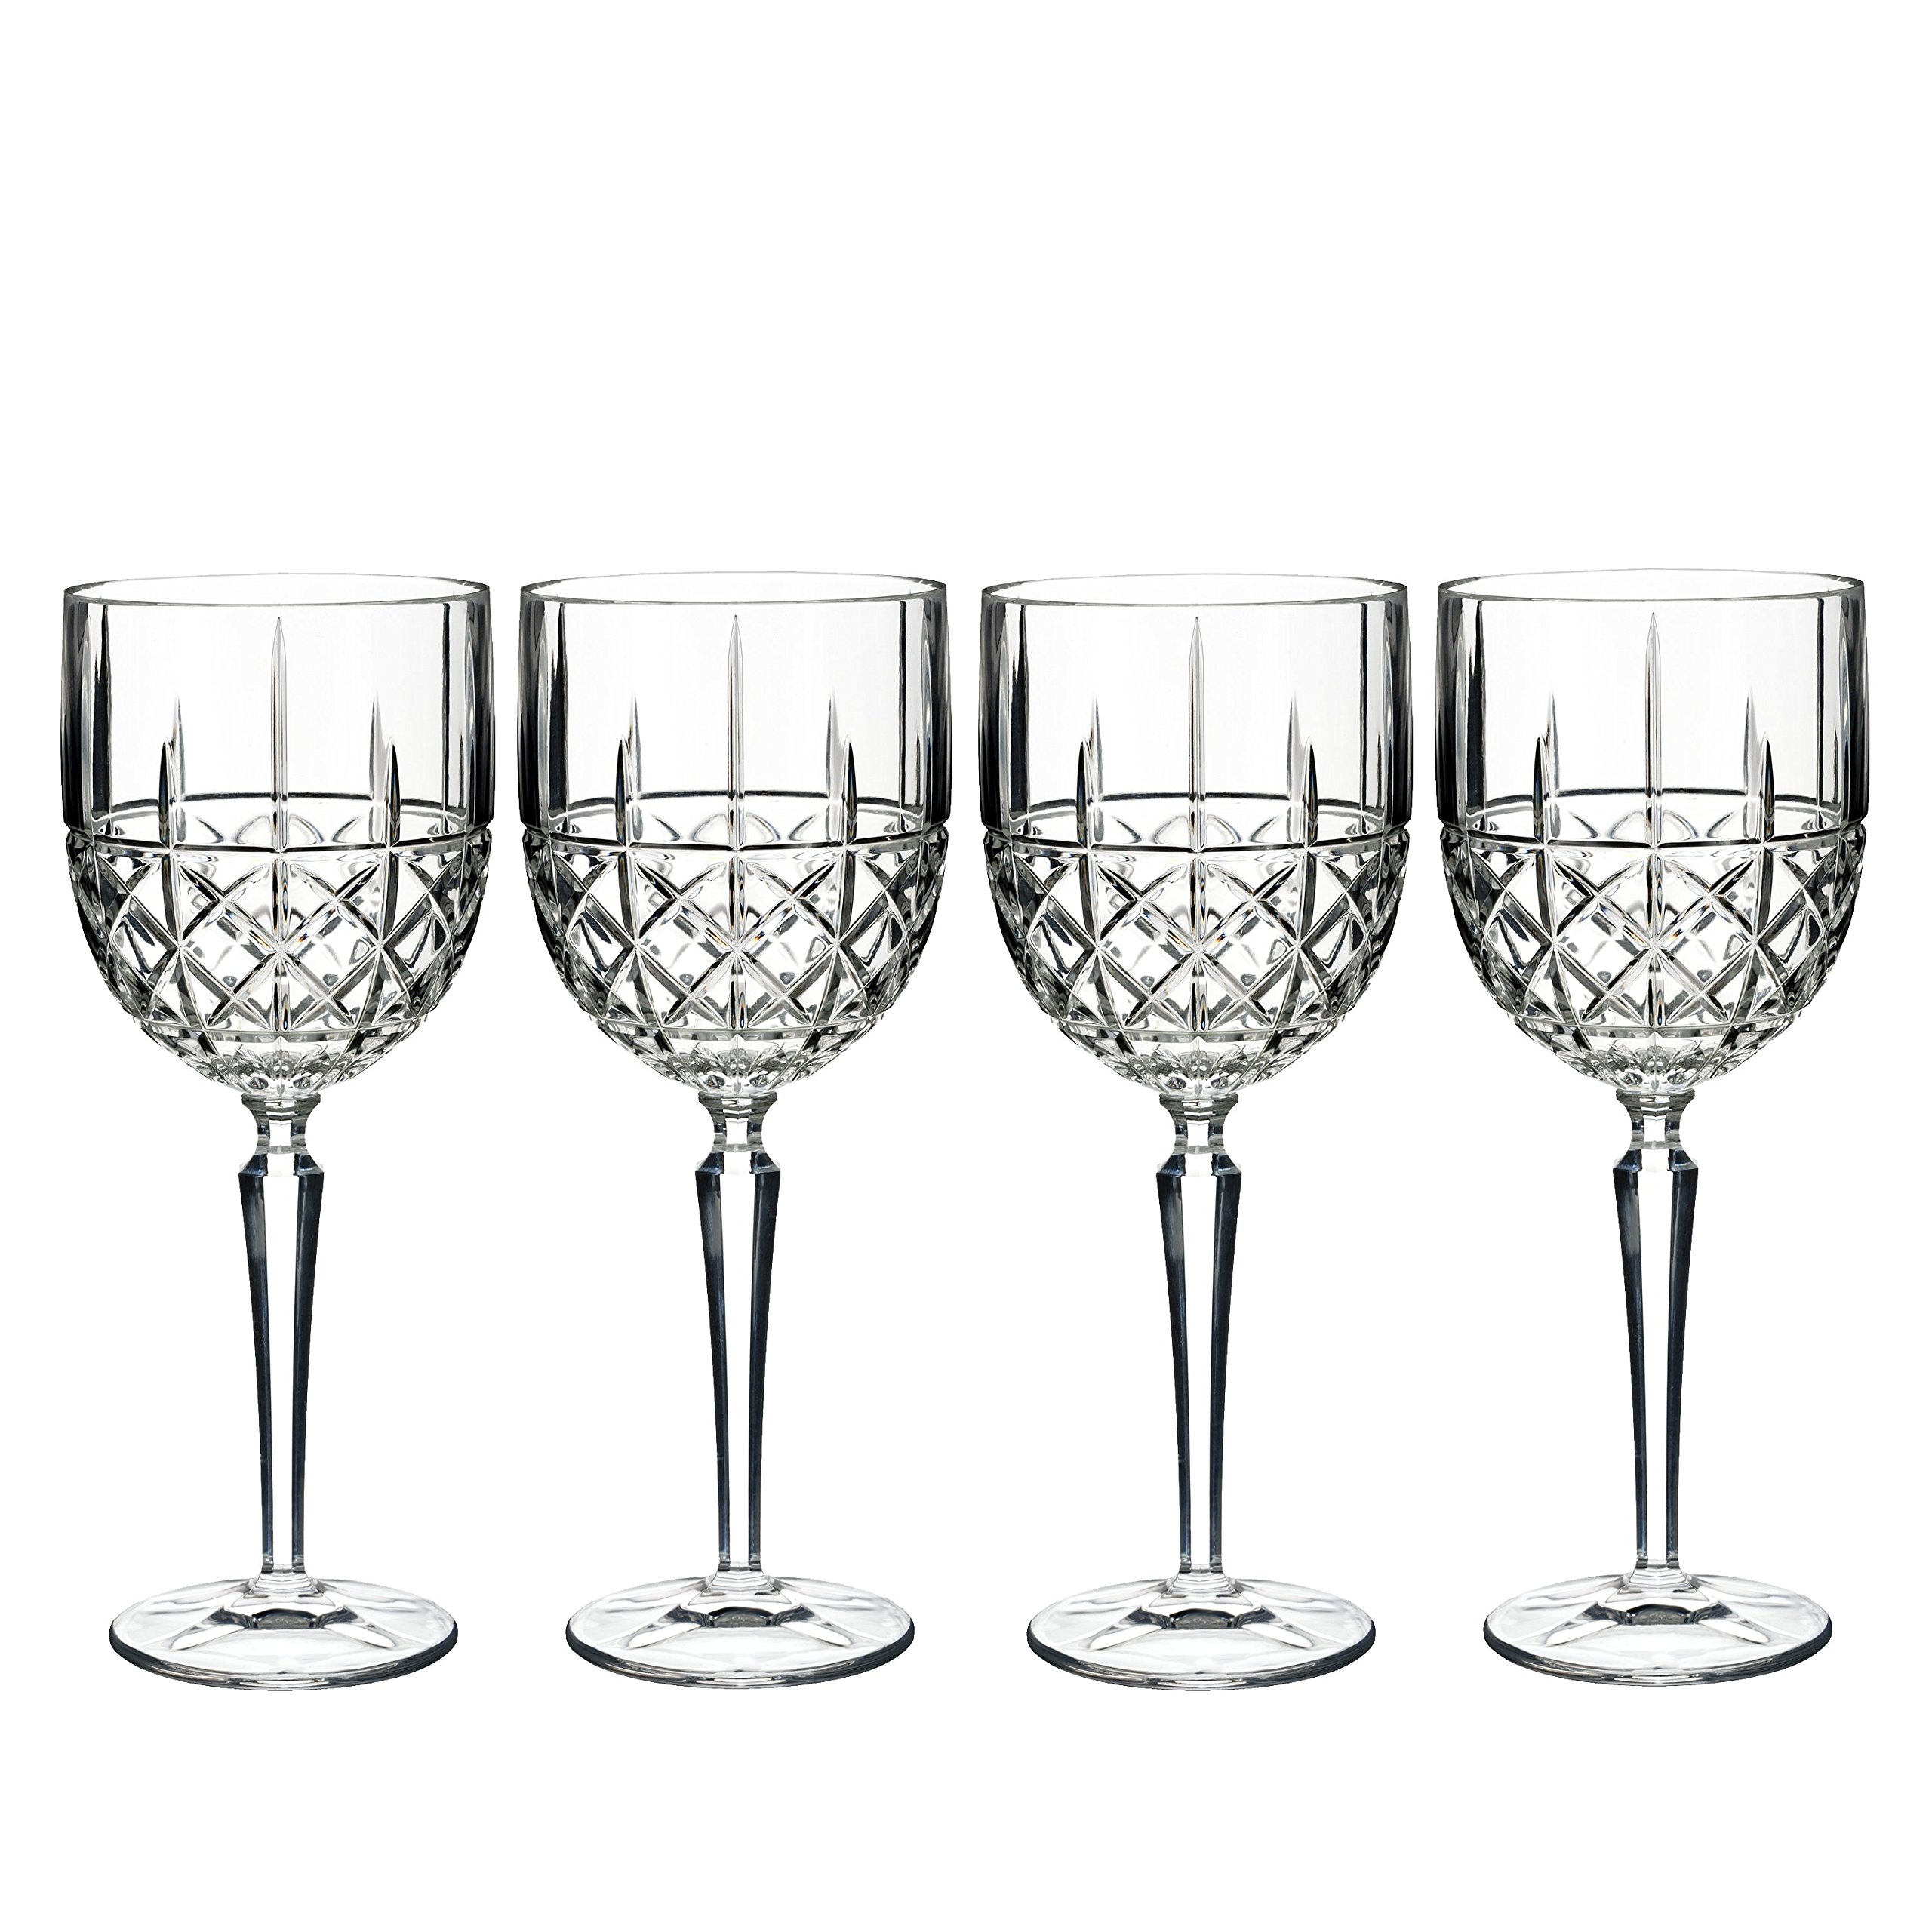 Marquis By Waterford Brady Goblet Set/4 Wine Glass, 15 Ounces, Clear Crystalline